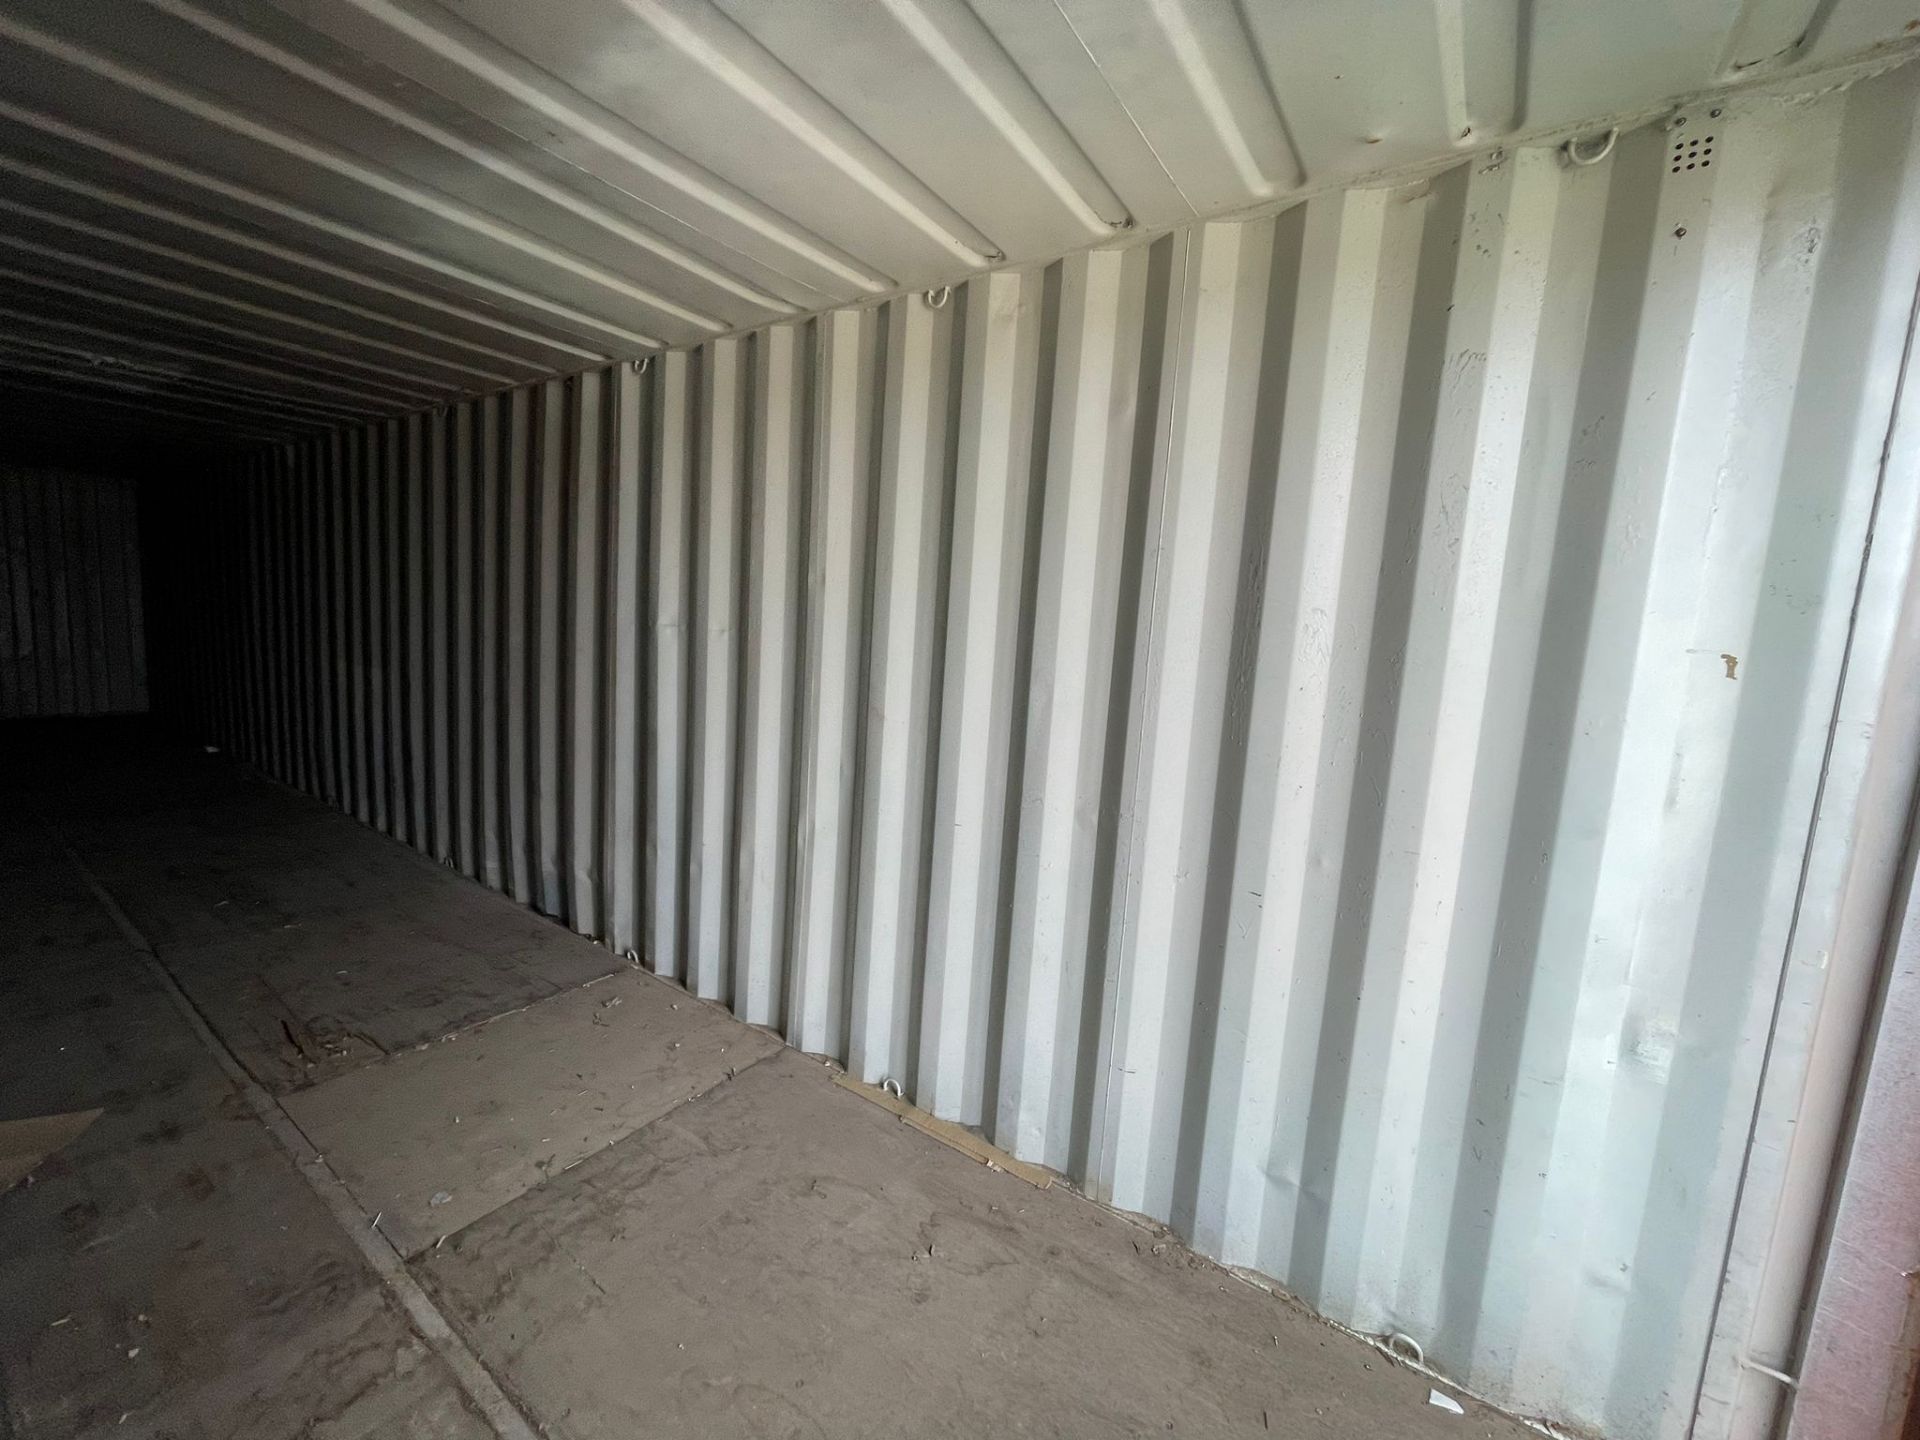 Shipping Container - ref IEAU4208486 - NO RESERVE (40’ GP - Standard) - Image 2 of 4